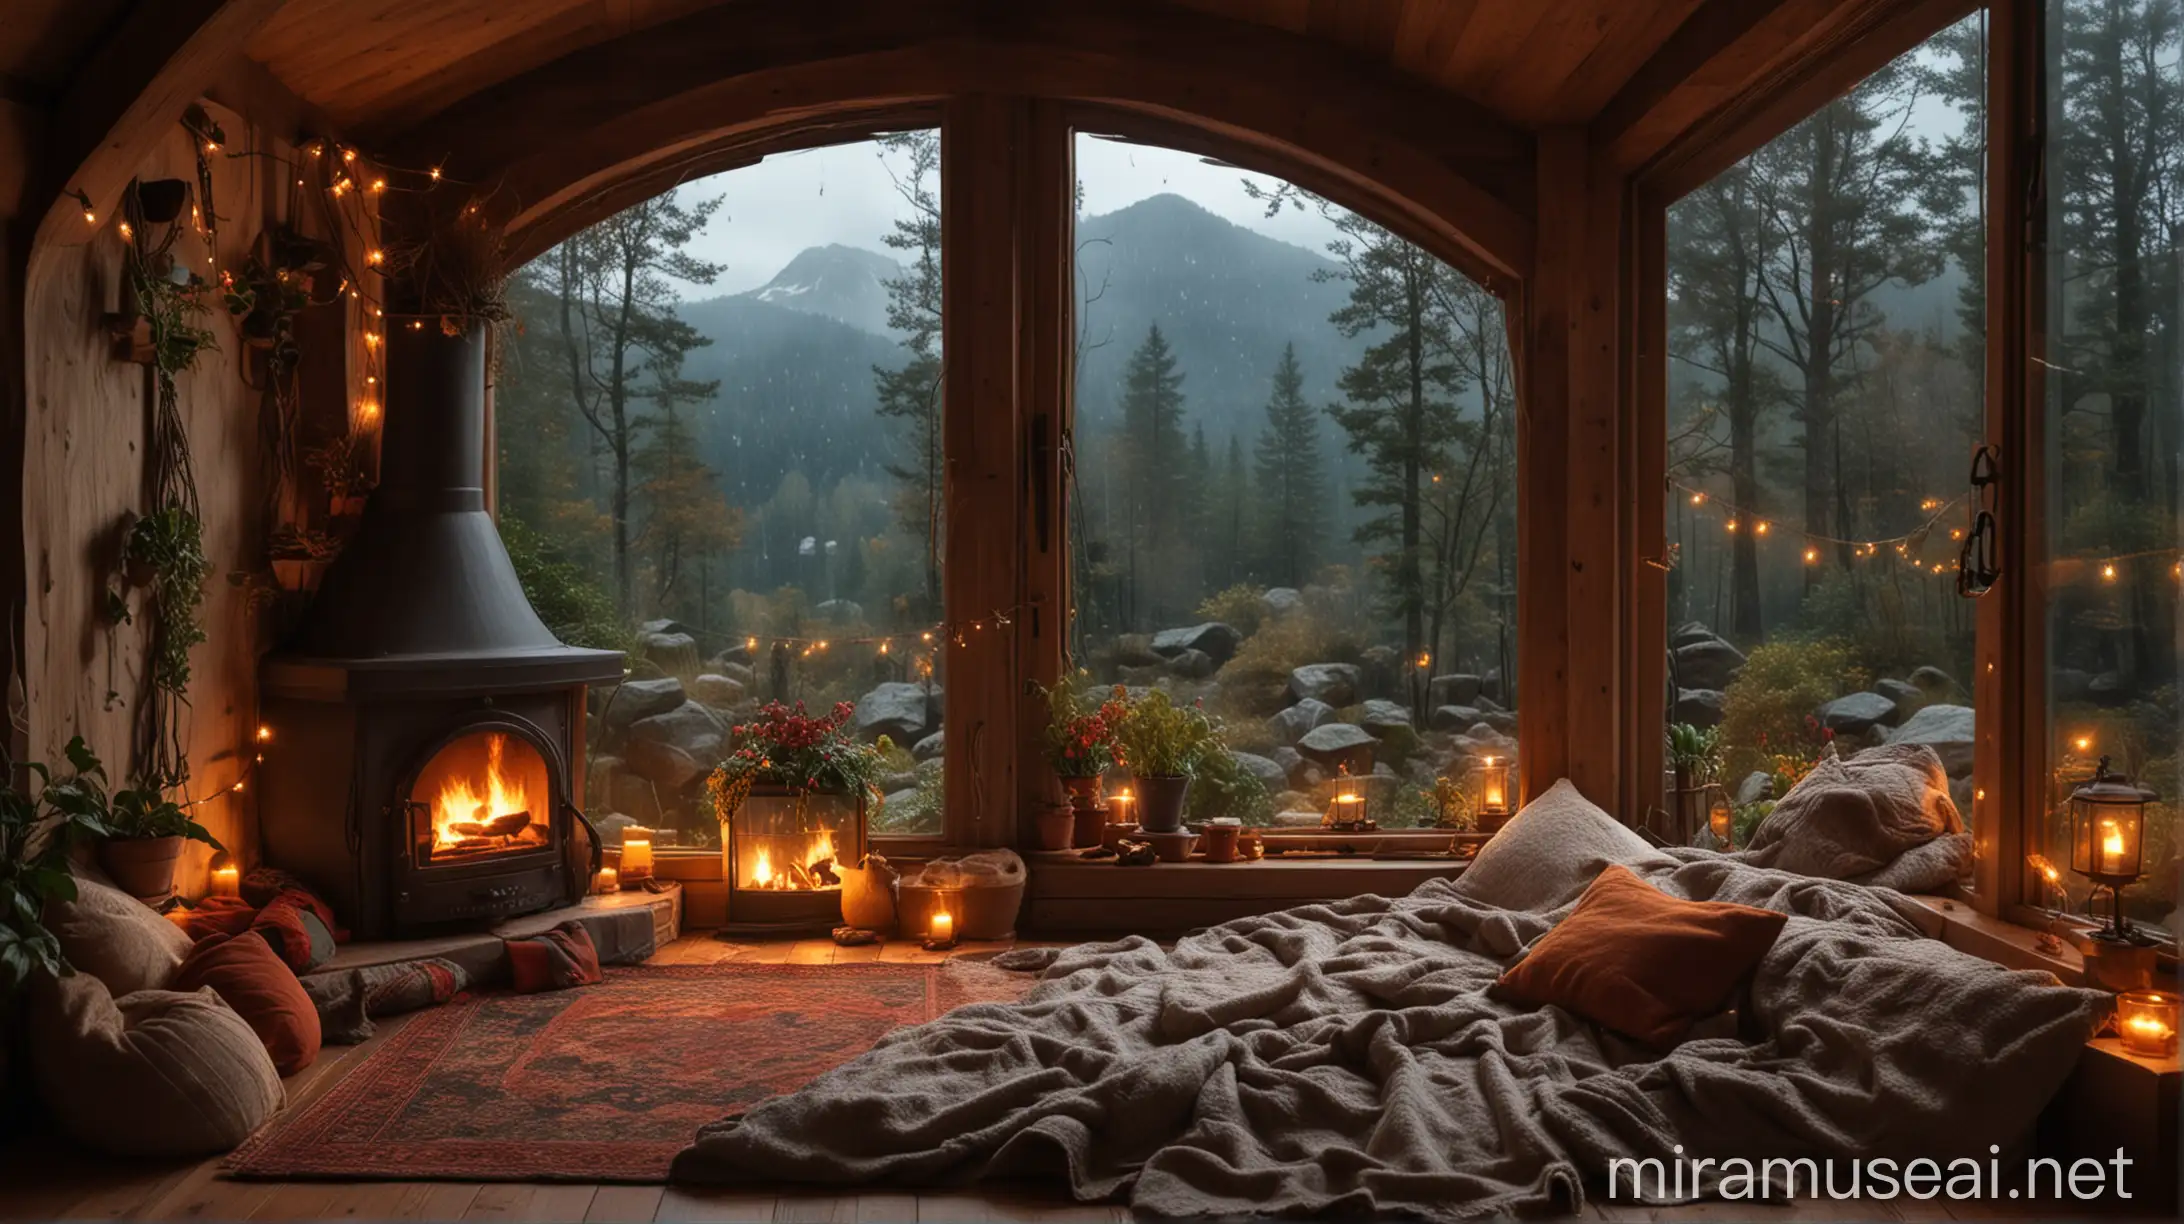 Cozy hobbit room, with two small cozy plants, pillows, string lights, blankets, fireplace box, big window with a rainy fall night deep forest mountain view., Mysterious with fireplace box sia view, 